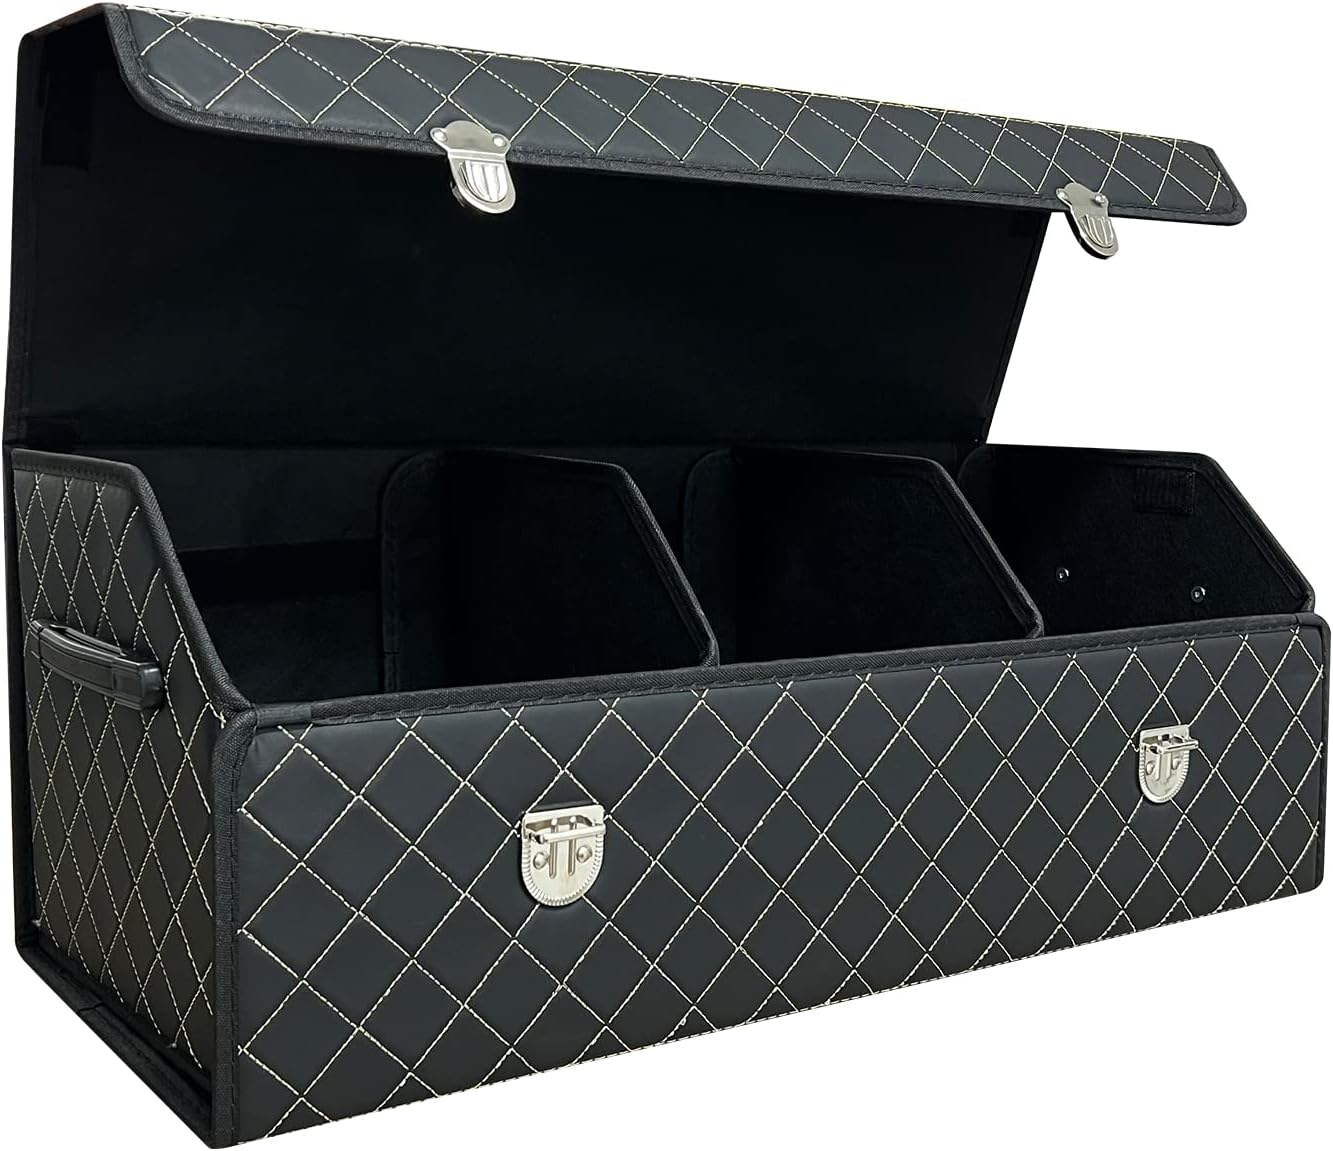 Blushbees Car Storage Organizer - Spacious, Durable, and Foldable 